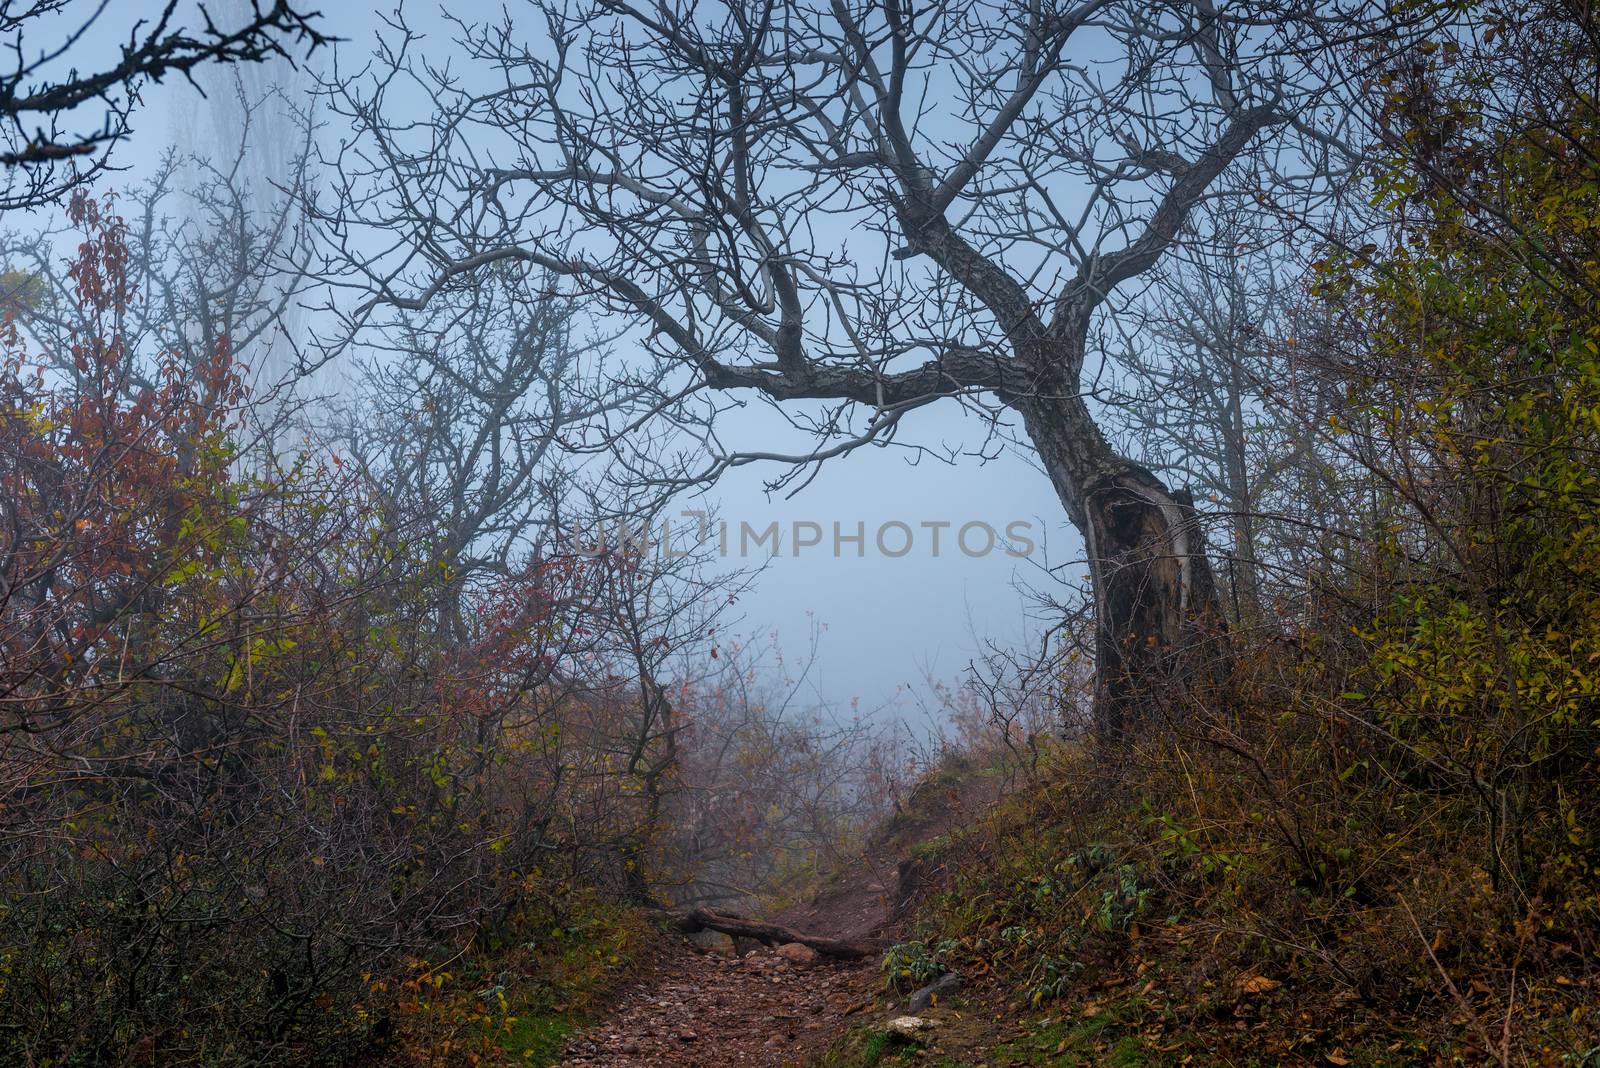 in the frame snag with fallen leaves foggy autumn day, landscape by kosmsos111